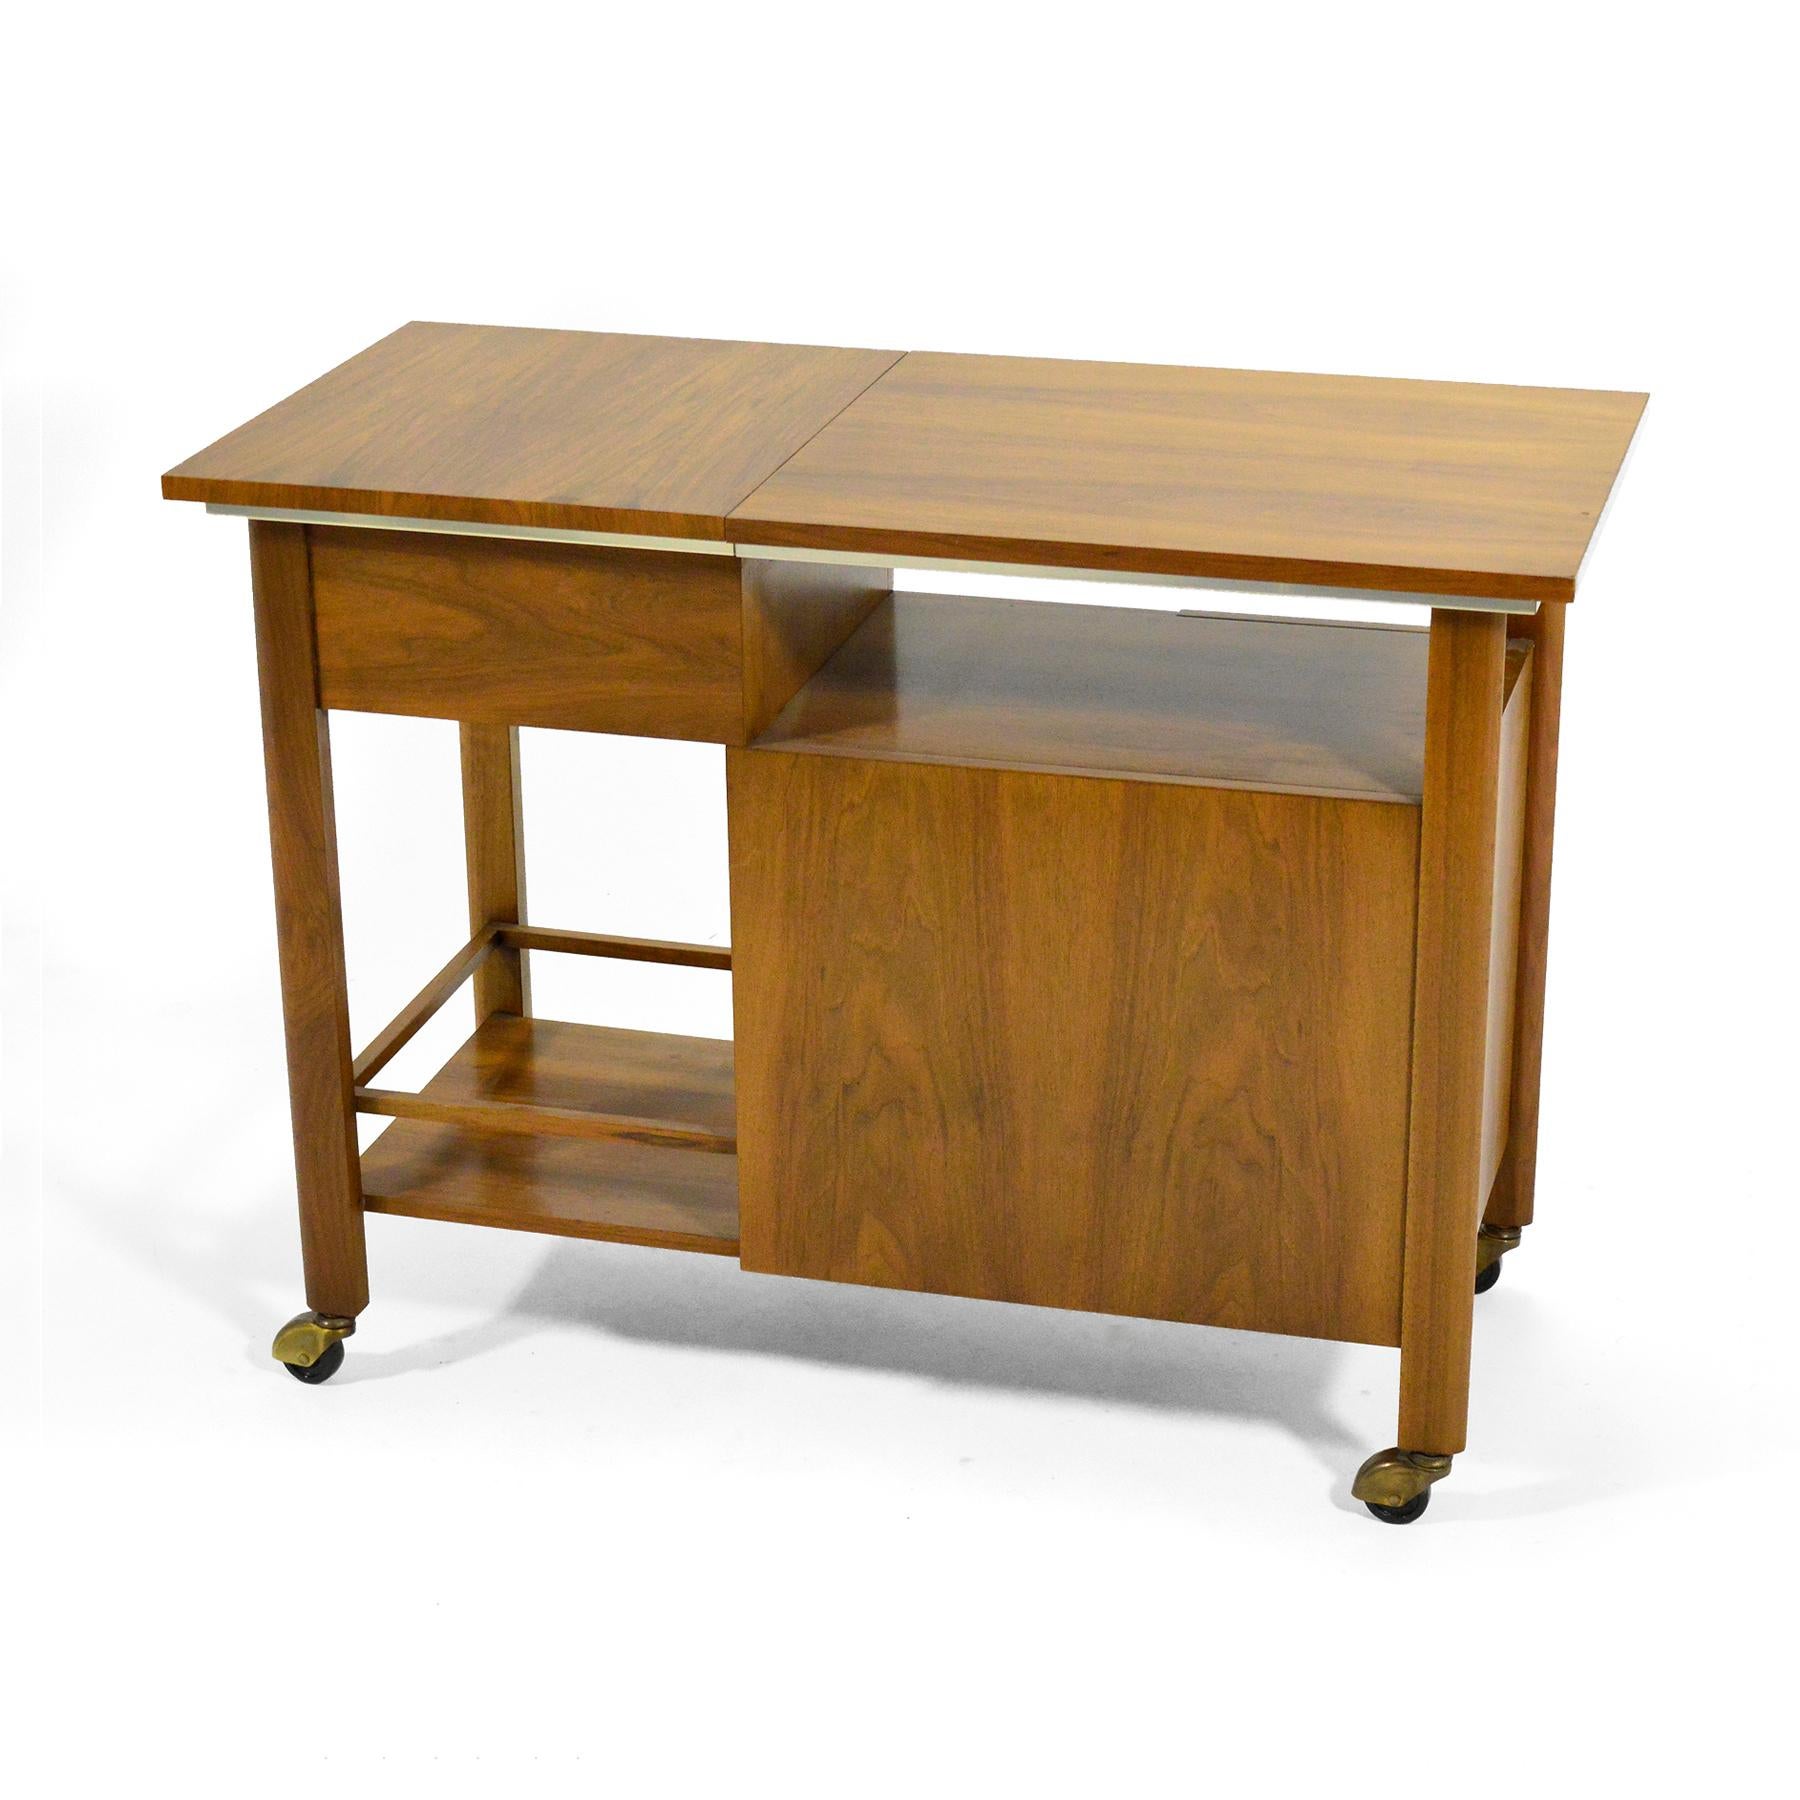 Mid-20th Century John Widdicomb Bar Cart / Server with Expanding Top For Sale